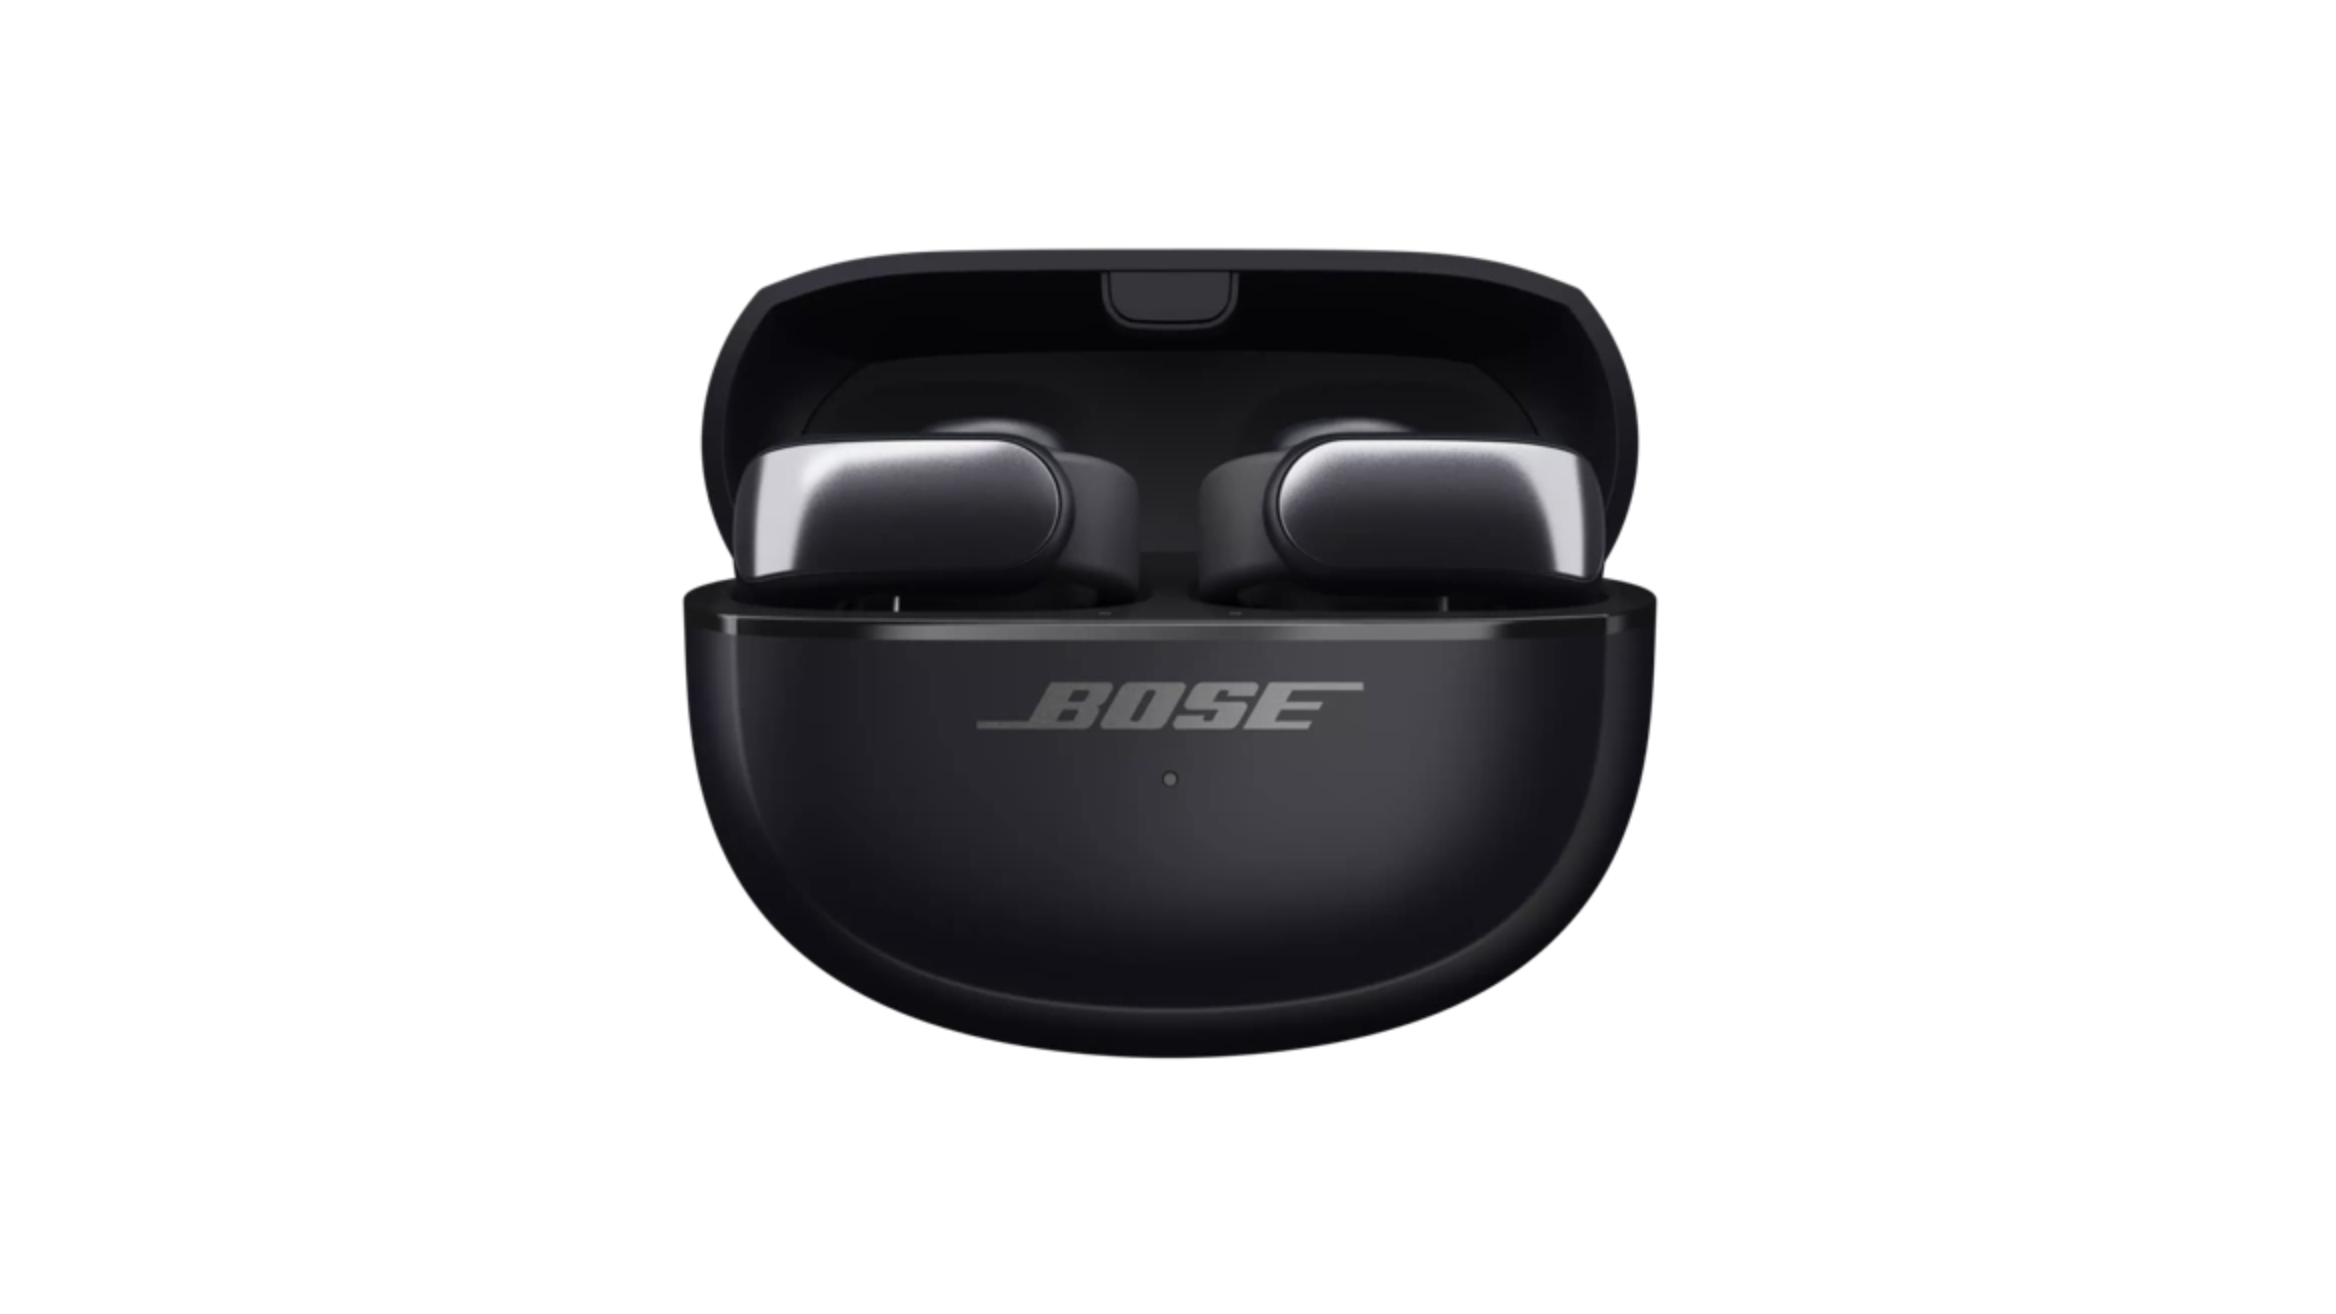 The Bose ultra open earbuds in their charging case